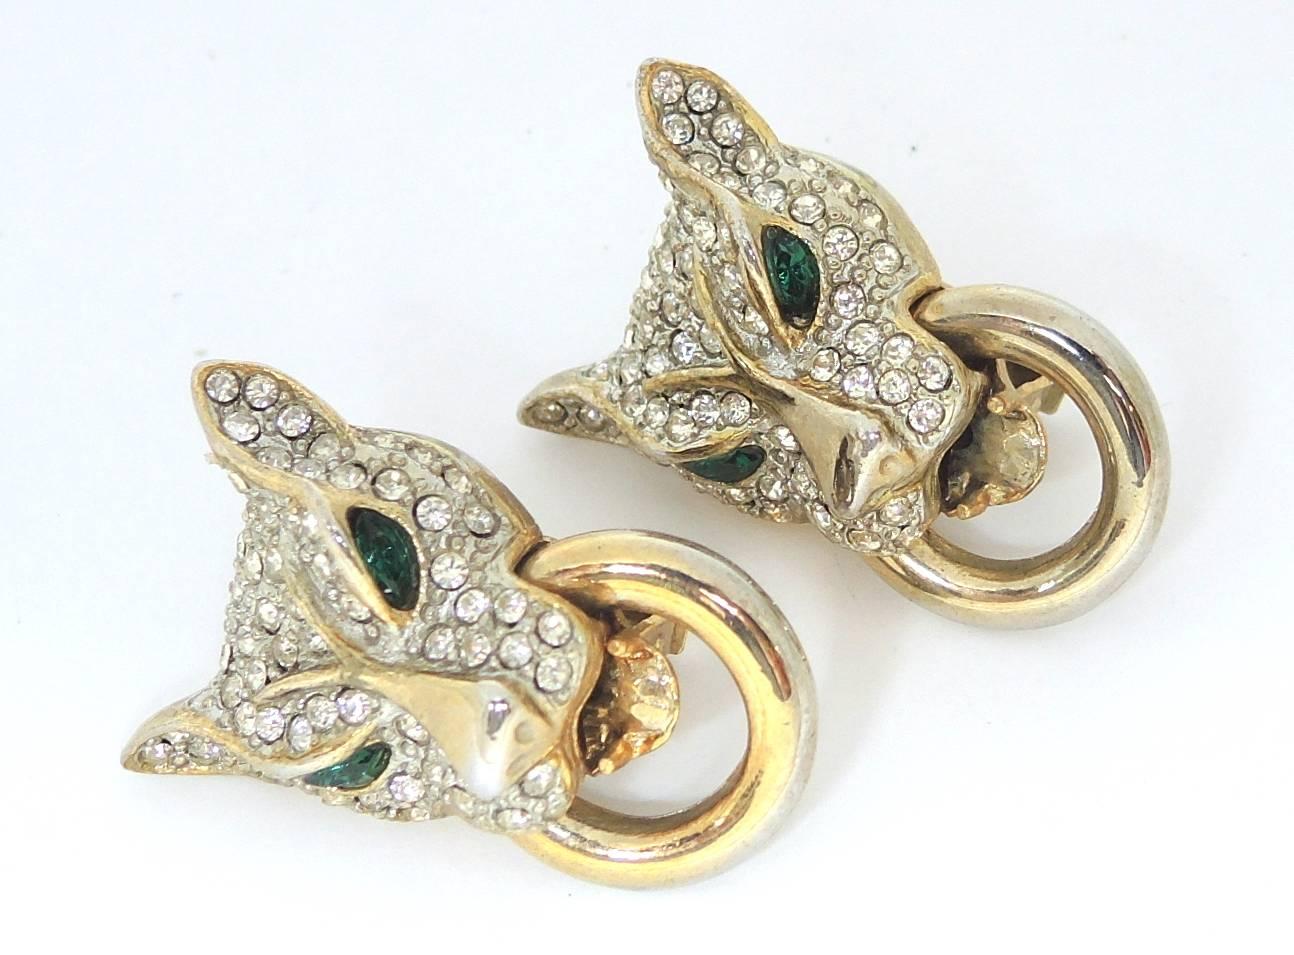 These vintage panther earrings is designed with green crystals eyes surrounded by clear crystal in a gold-tone setting.  These clip earrings measure 2” x 1-1/4” and are in excellent condition.